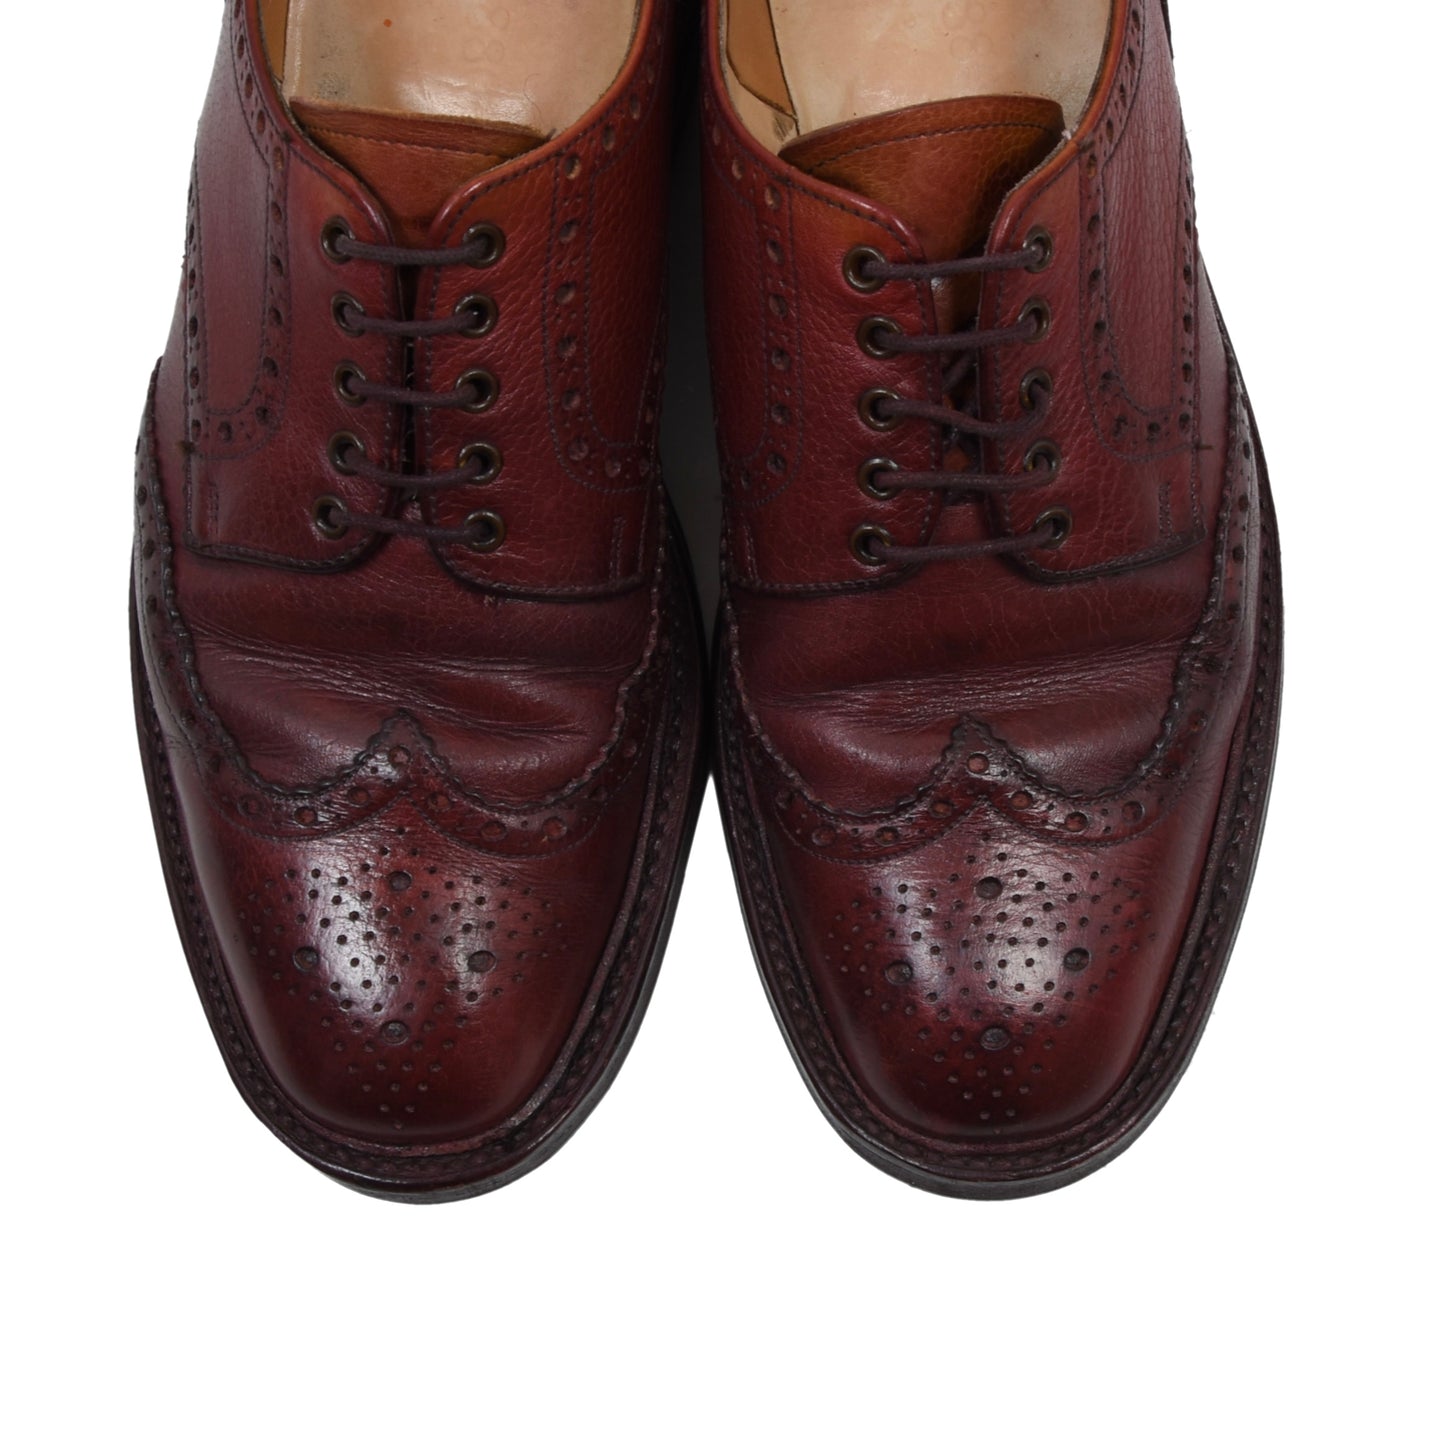 Loake 1880 Leather Shoes Size 7 - Burgundy